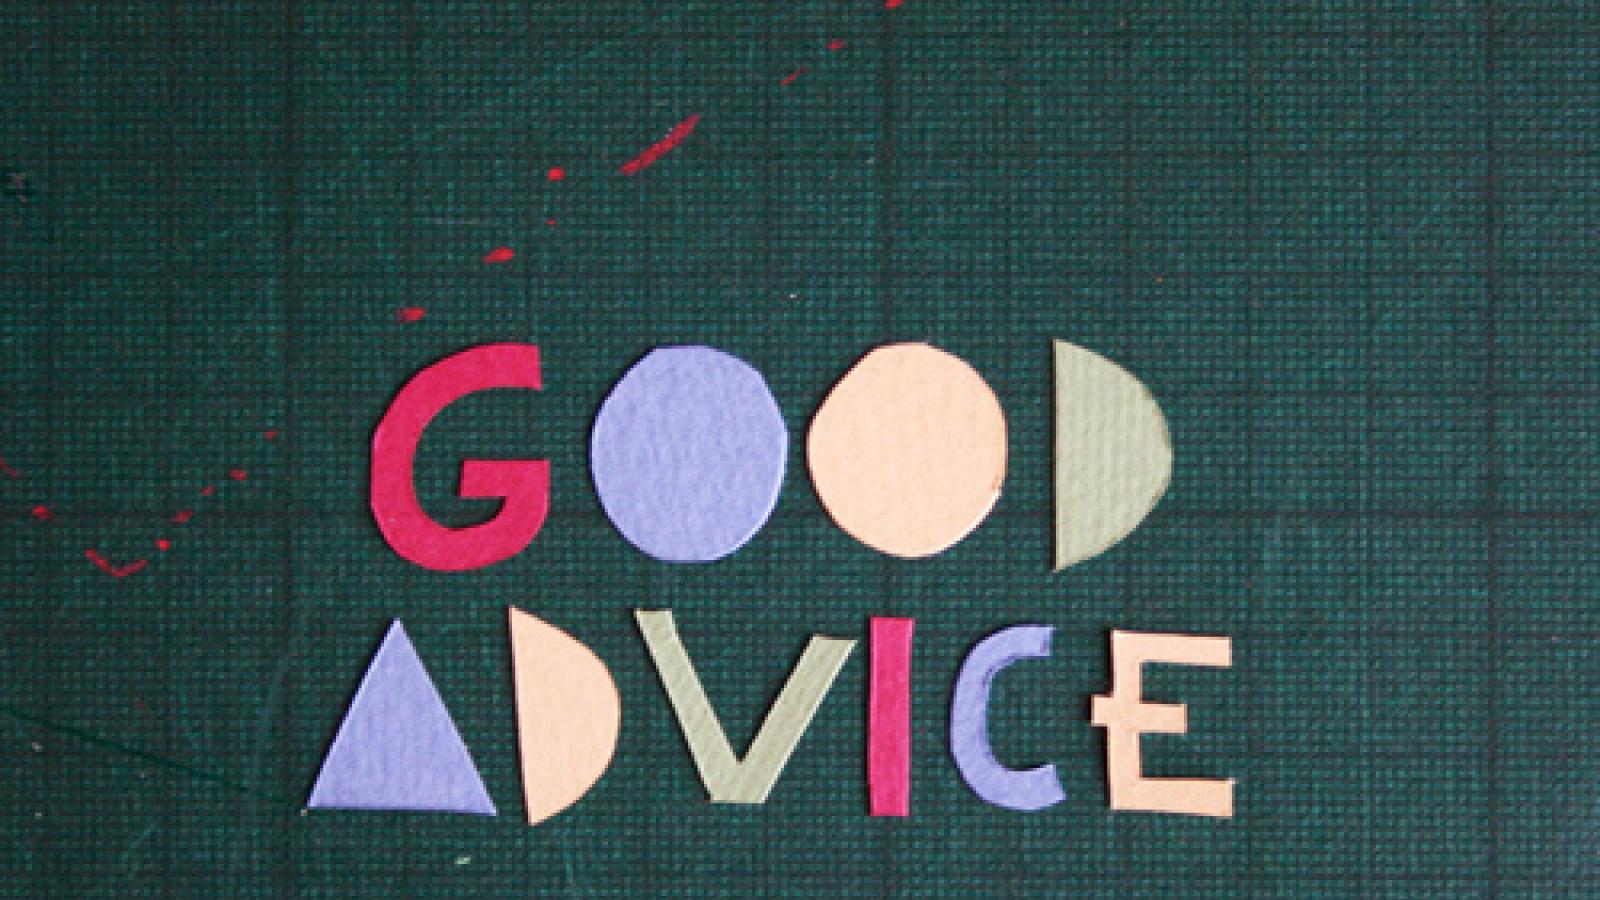 Hand-cut letters spelling out "good advice"